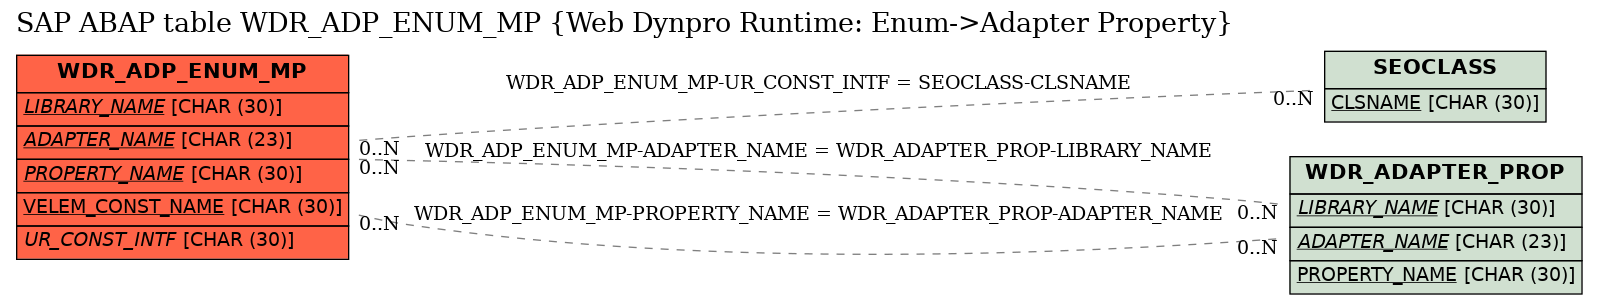 E-R Diagram for table WDR_ADP_ENUM_MP (Web Dynpro Runtime: Enum->Adapter Property)